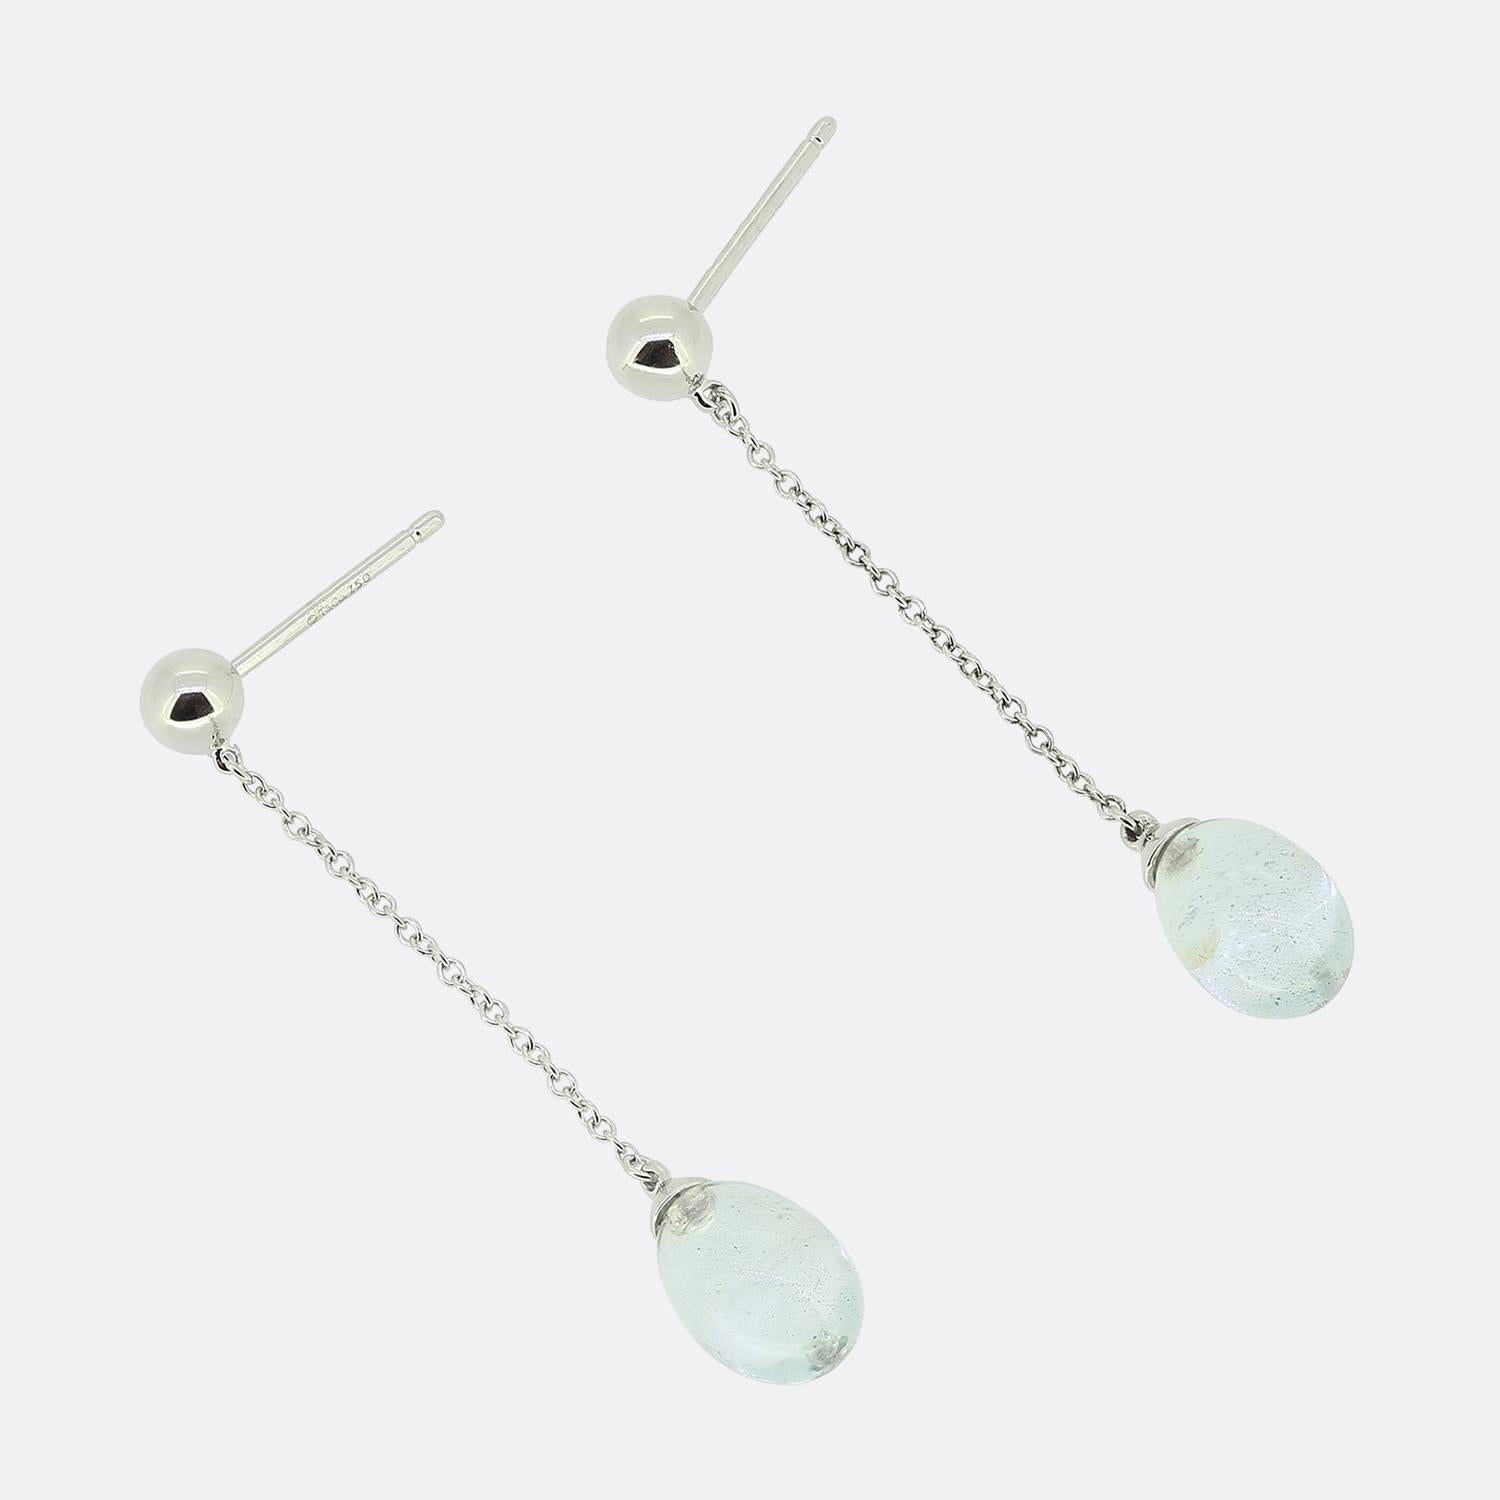 Here we have chic and stylish pair of drop earrings from the world renowned jewellery designer, Tiffany & Co. Each piece has been crafted from 18ct white gold with a plain polished ball motif playing host to a slim belcher chain which suspends a